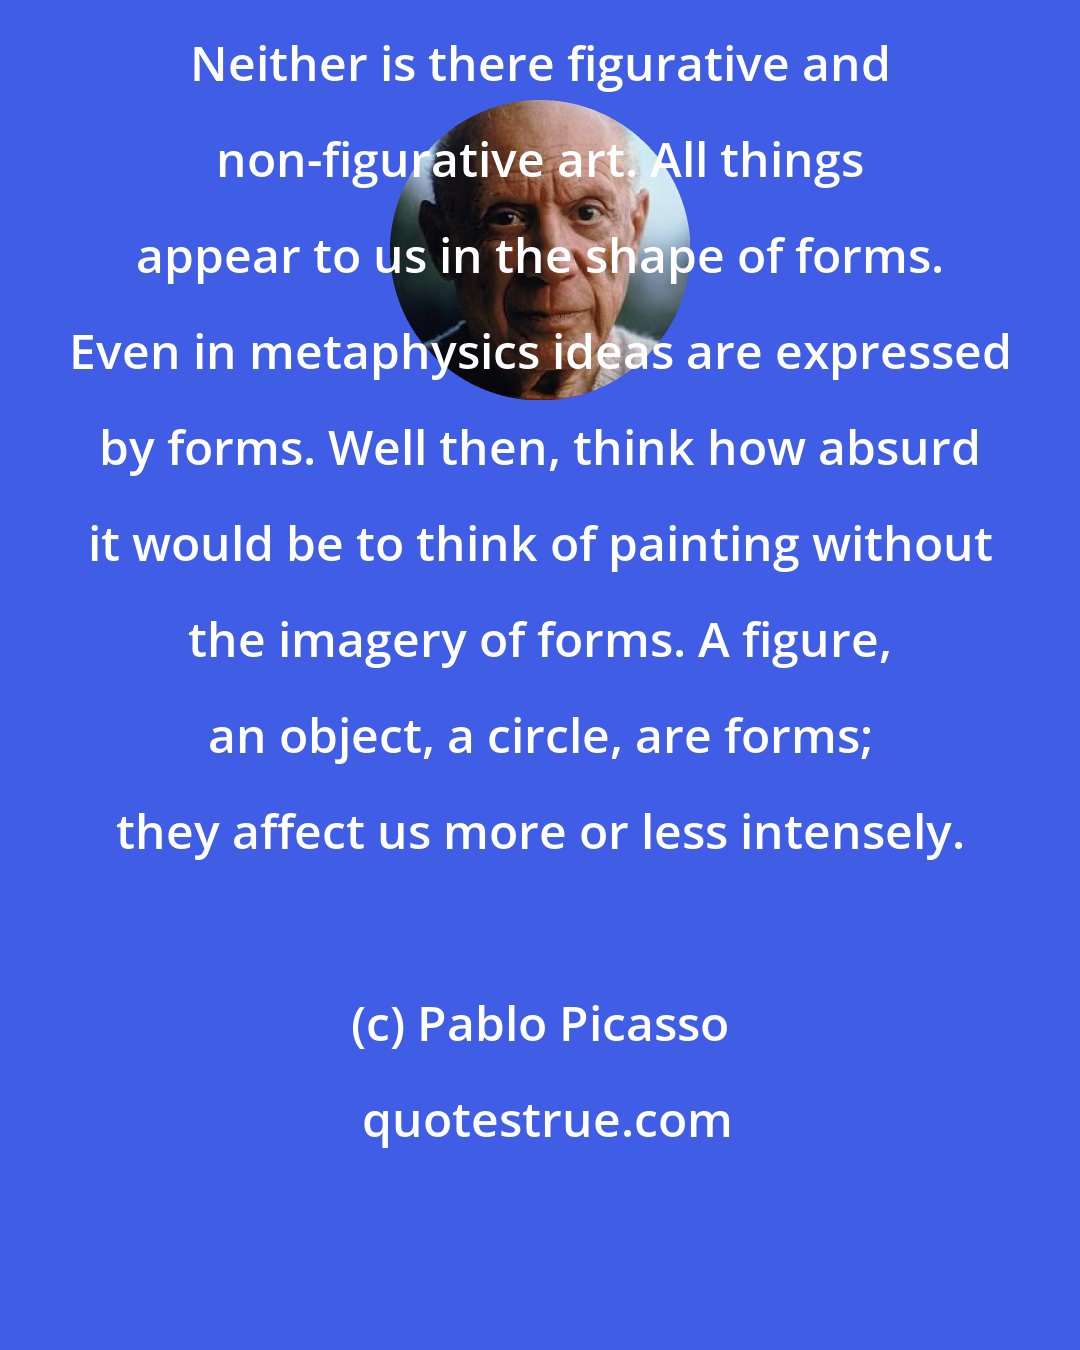 Pablo Picasso: Neither is there figurative and non-figurative art. All things appear to us in the shape of forms. Even in metaphysics ideas are expressed by forms. Well then, think how absurd it would be to think of painting without the imagery of forms. A figure, an object, a circle, are forms; they affect us more or less intensely.